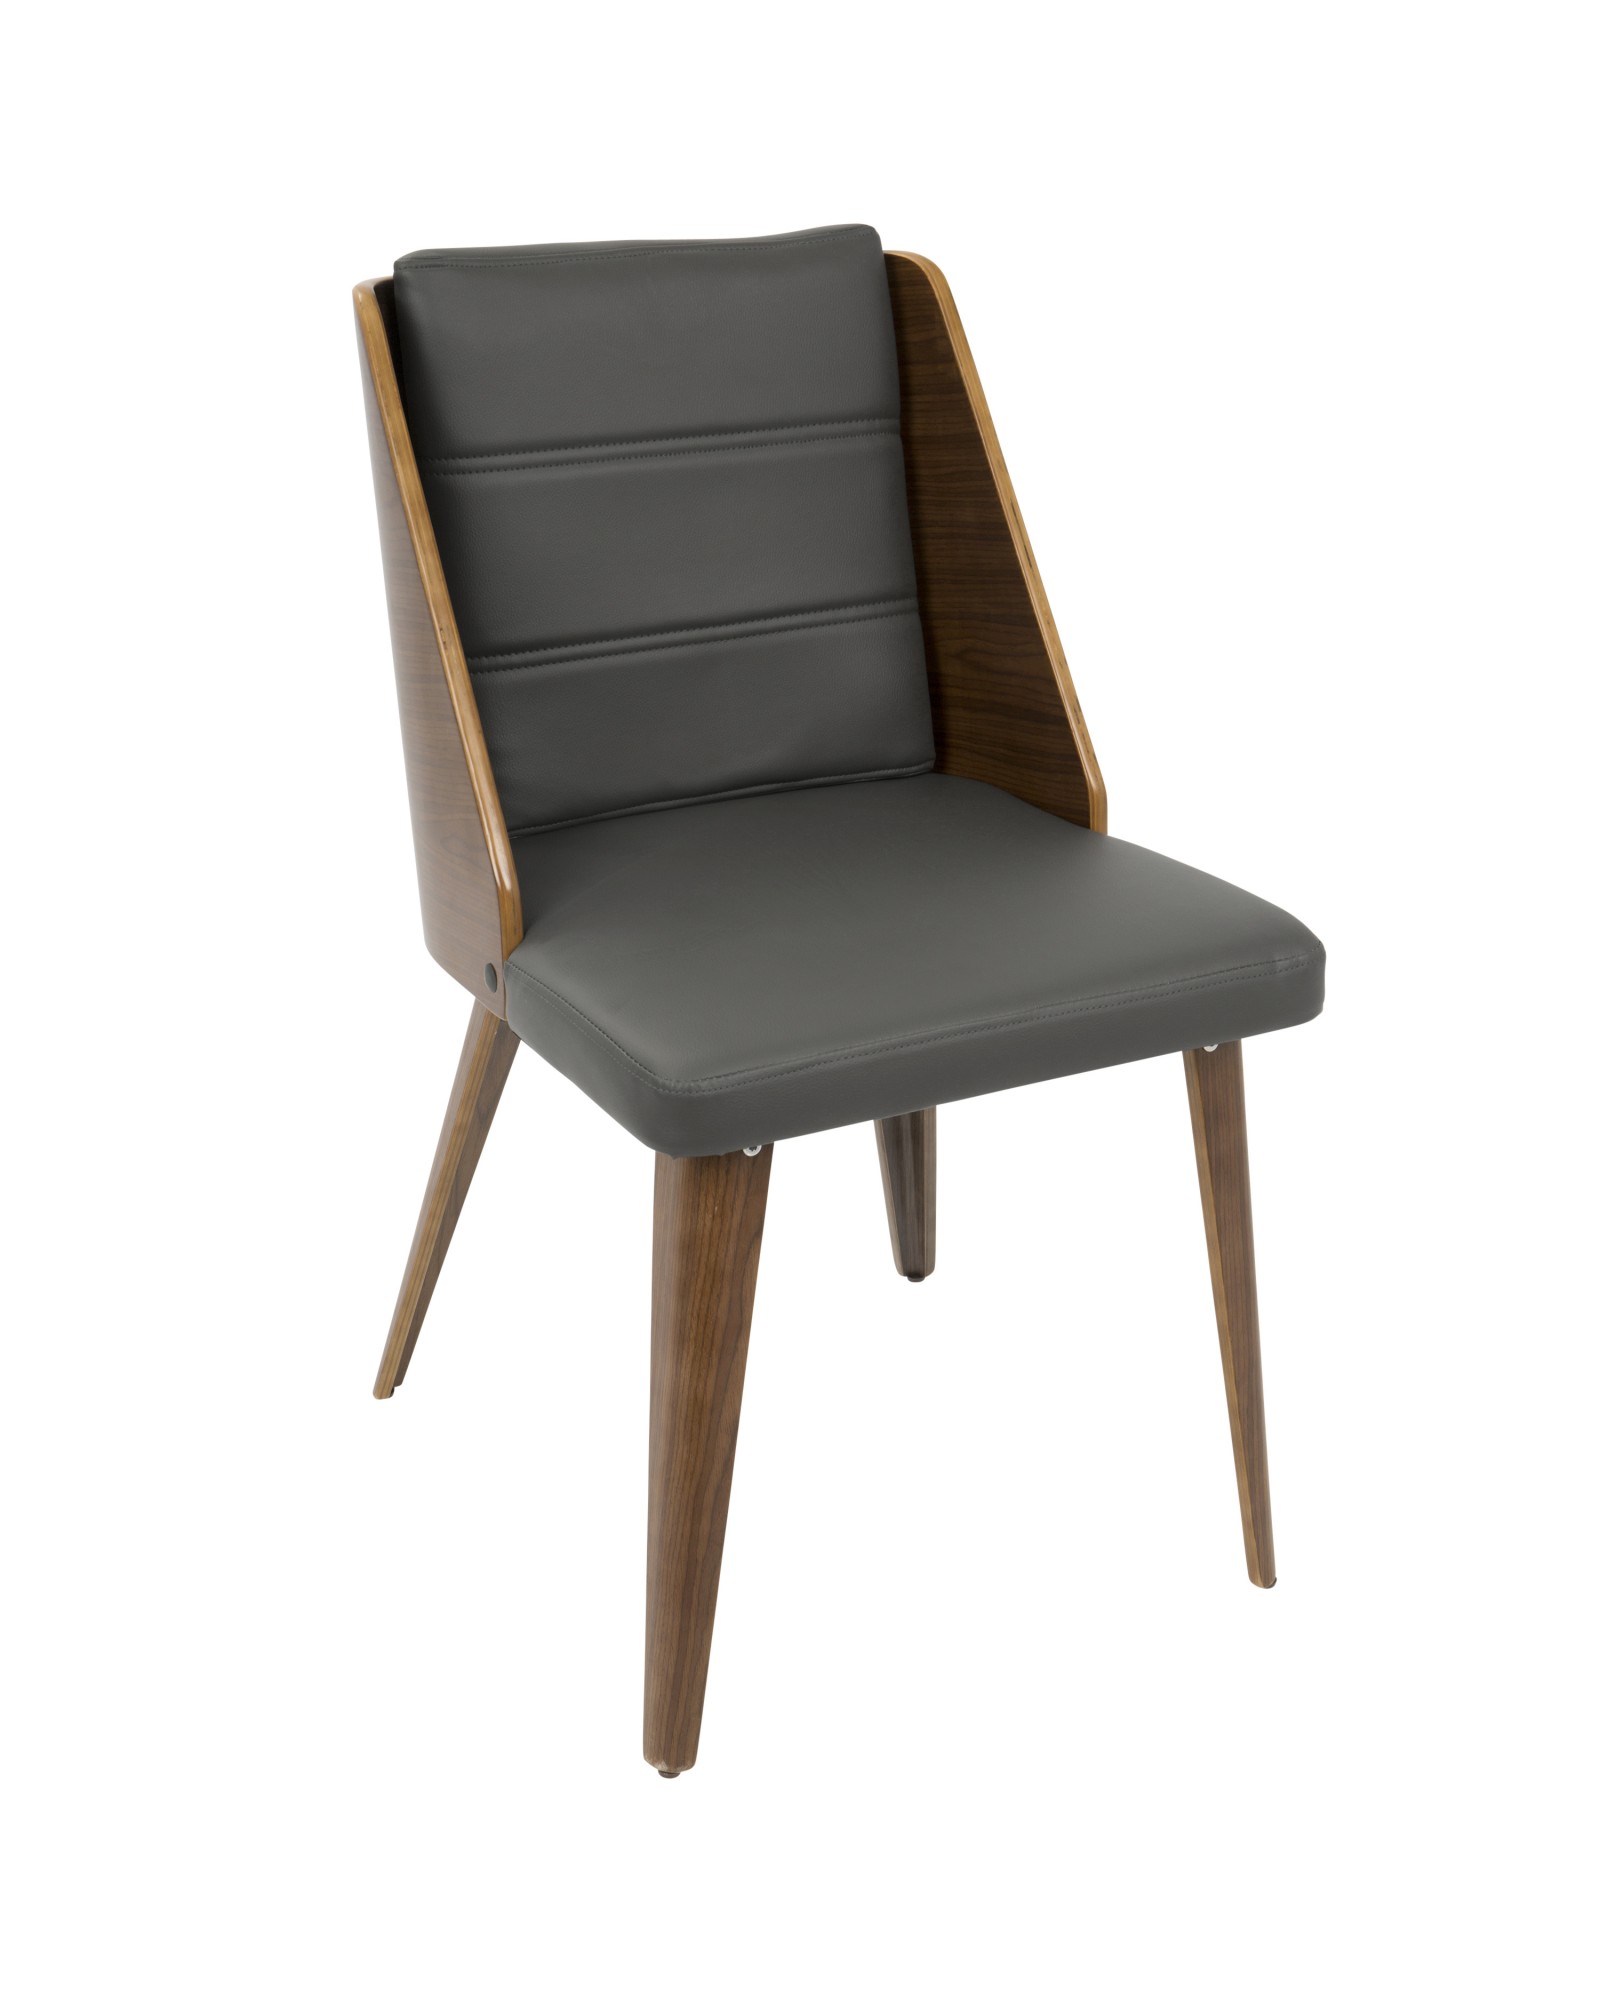 Galanti Mid-Century Modern Dining/Accent Chair in Walnut Wood and Grey Faux Leather - Set of 2